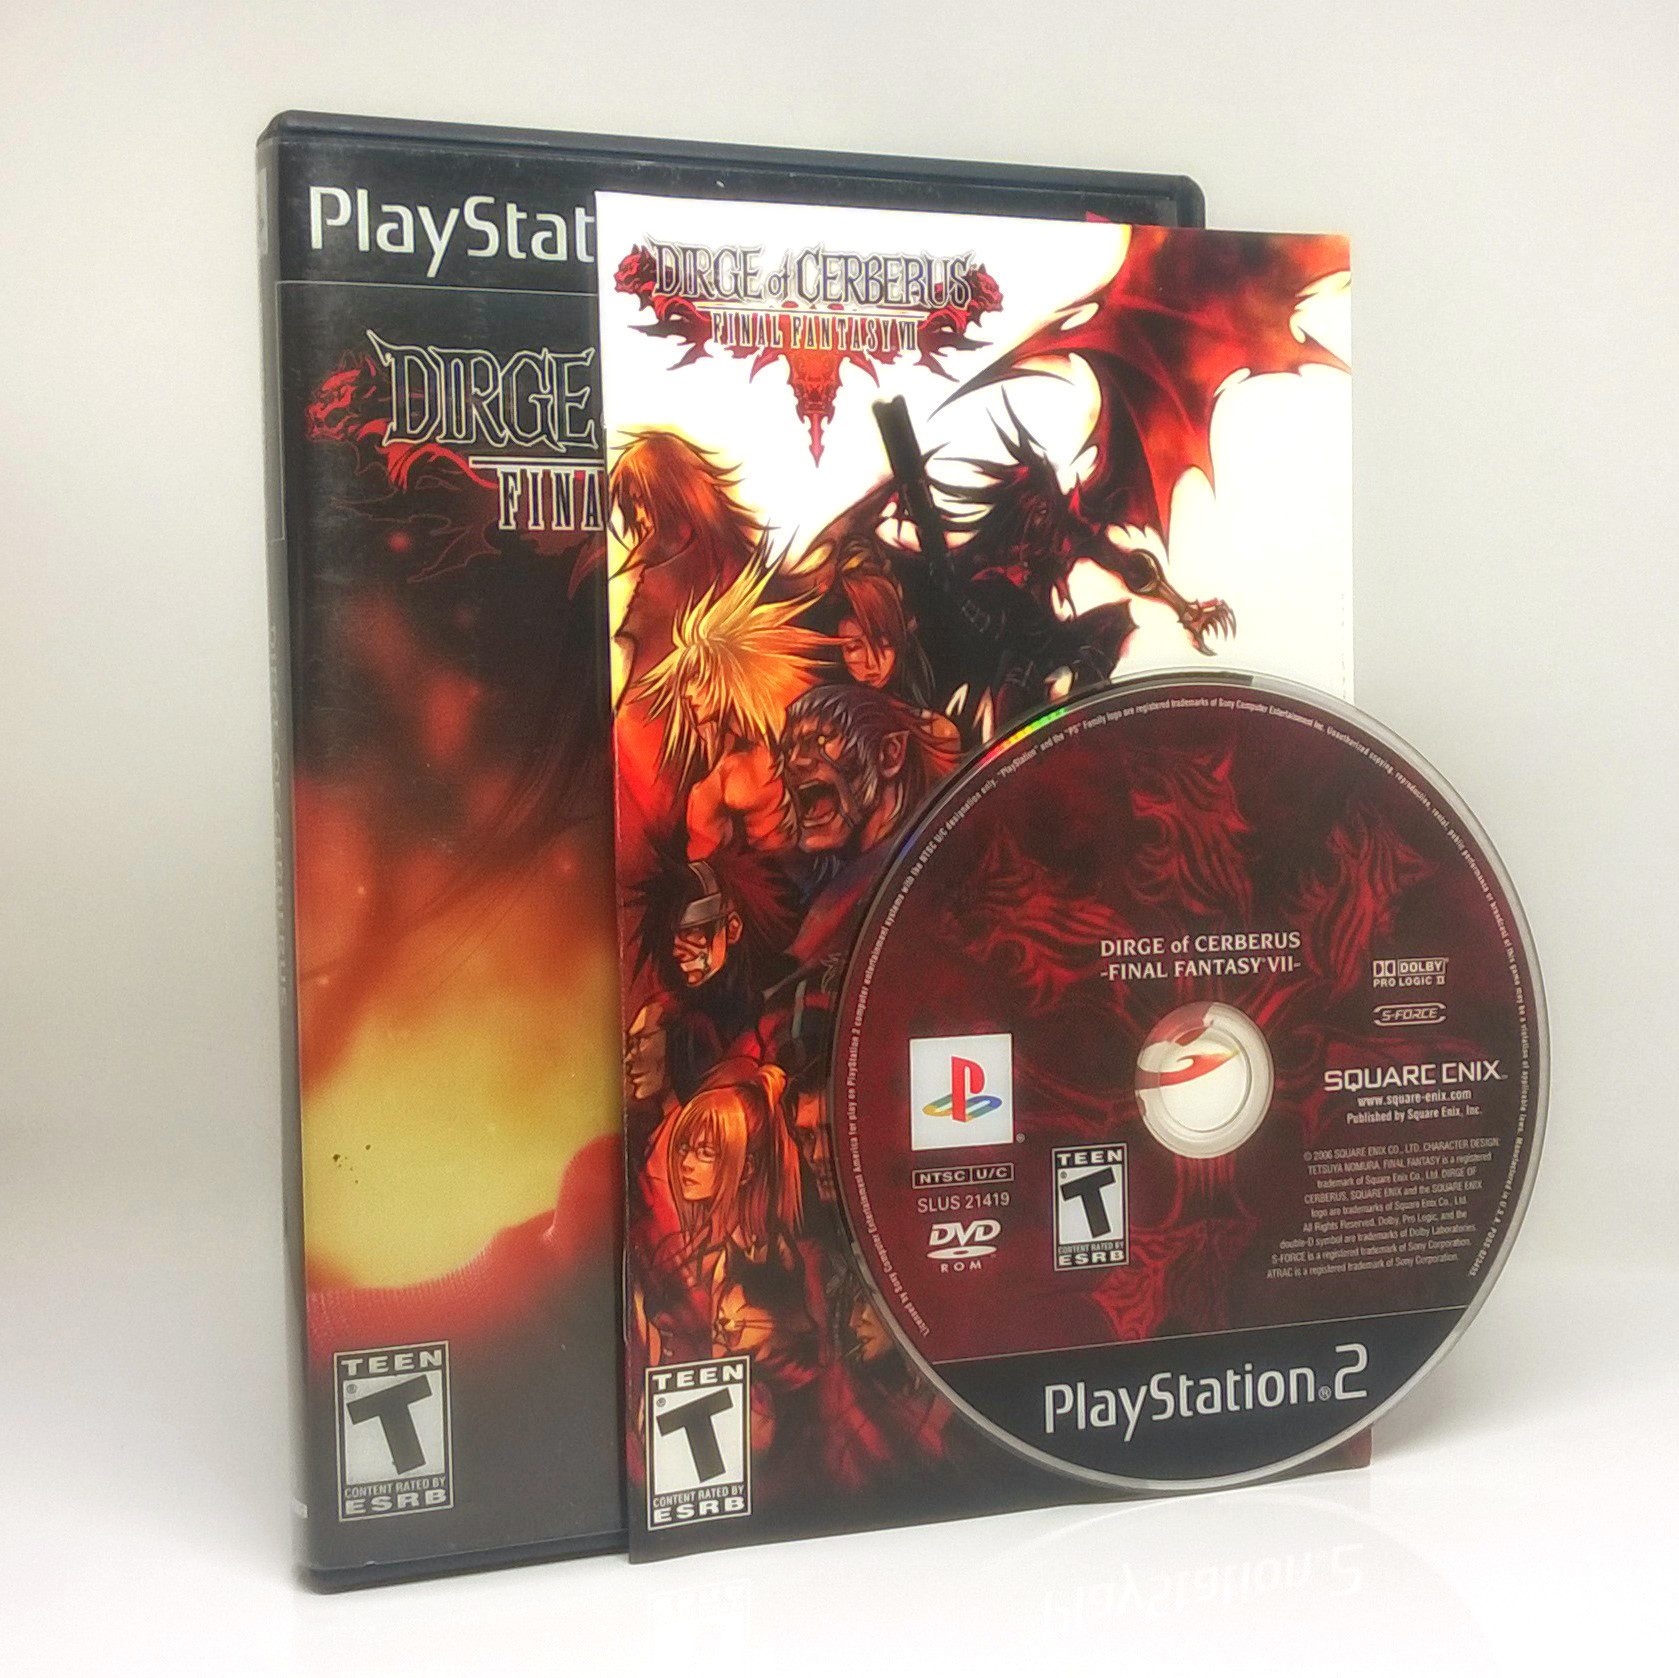 Dirge of Cerberus: Final Fantasy VII Sony PlayStation 2 Game